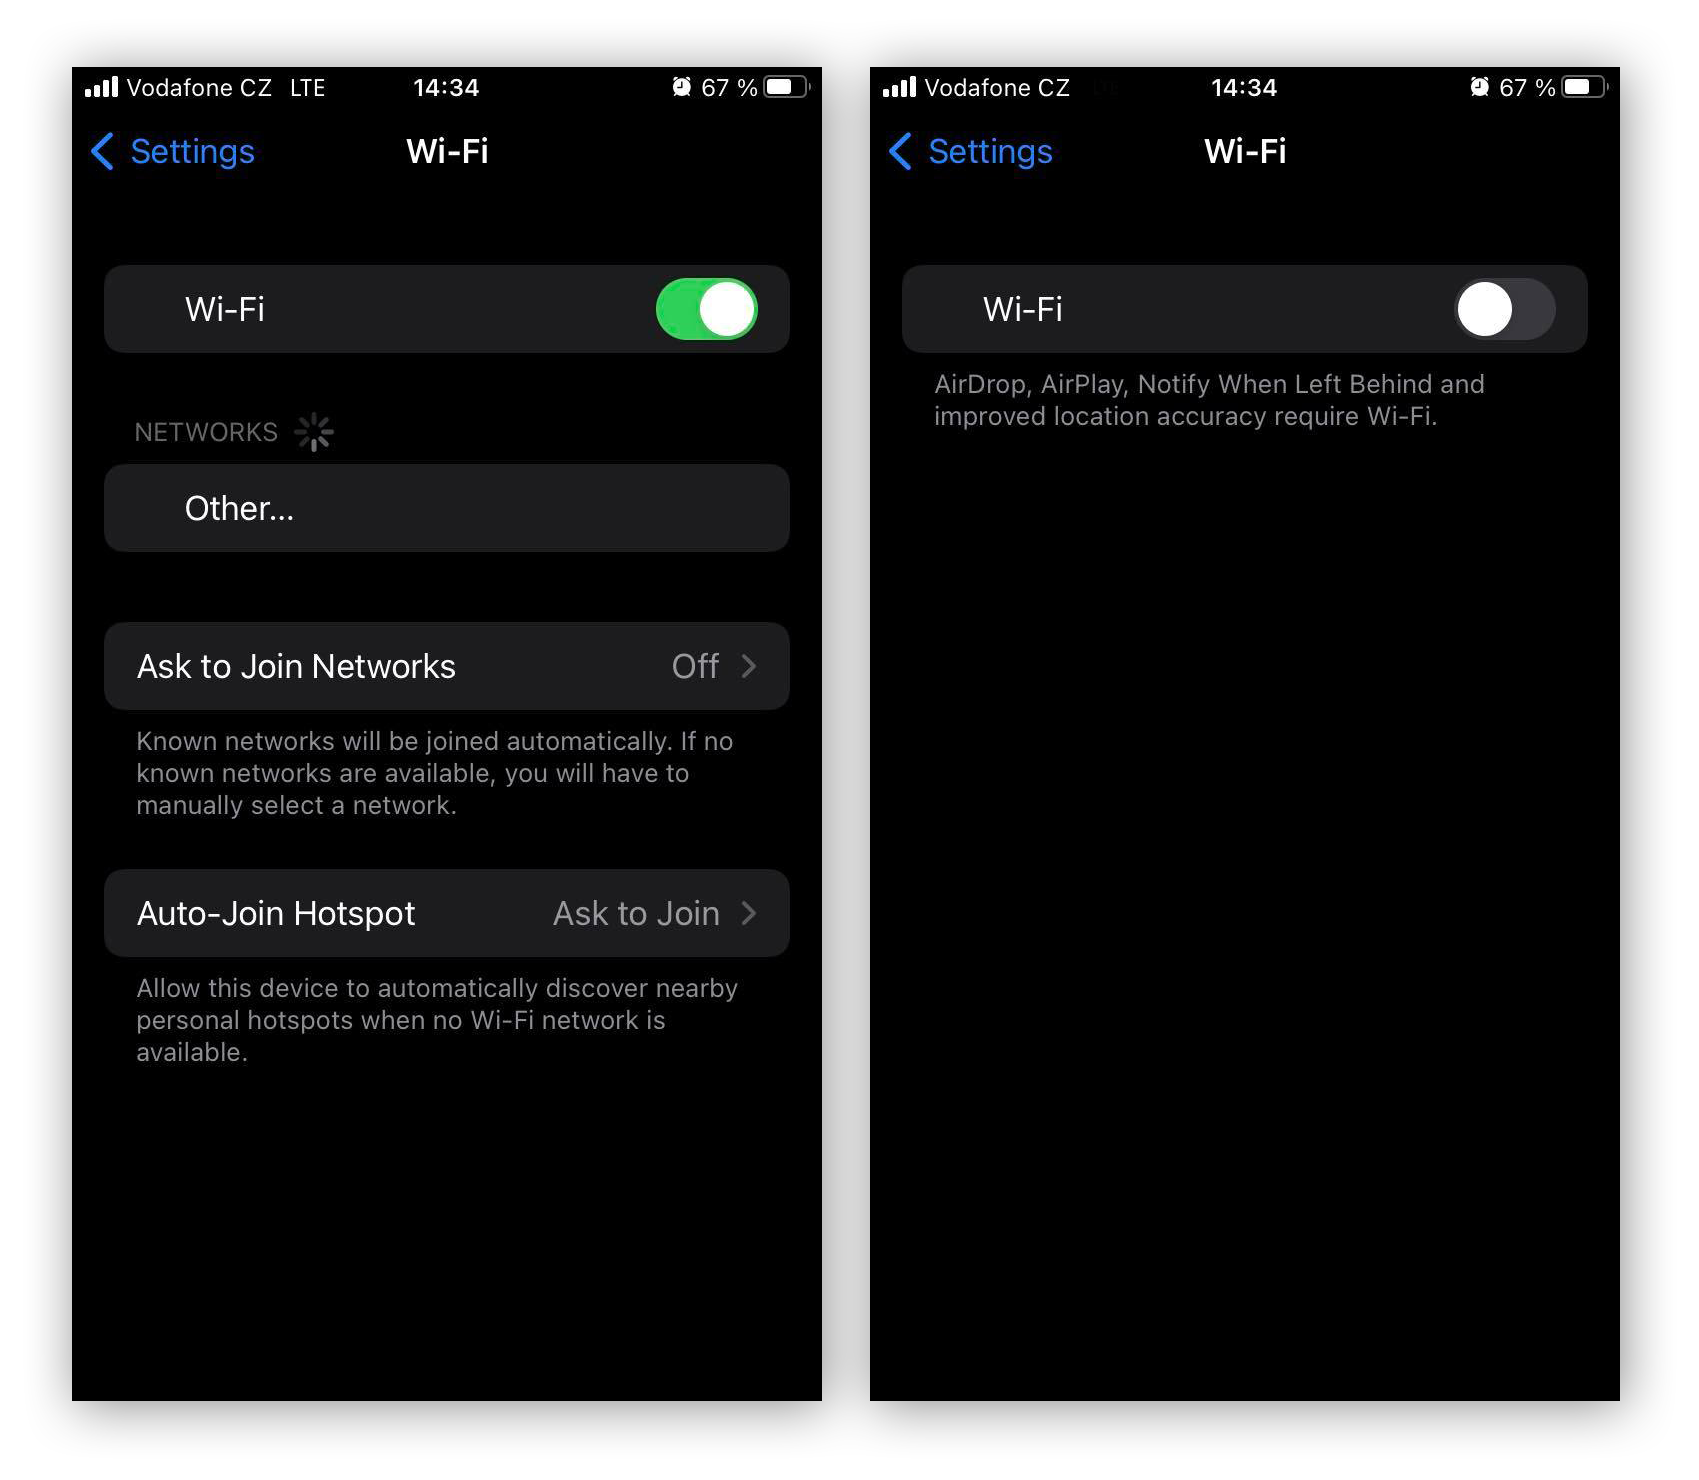 iPhone Wi-Fi switch toggled On and Off to show Wi-Fi connection.